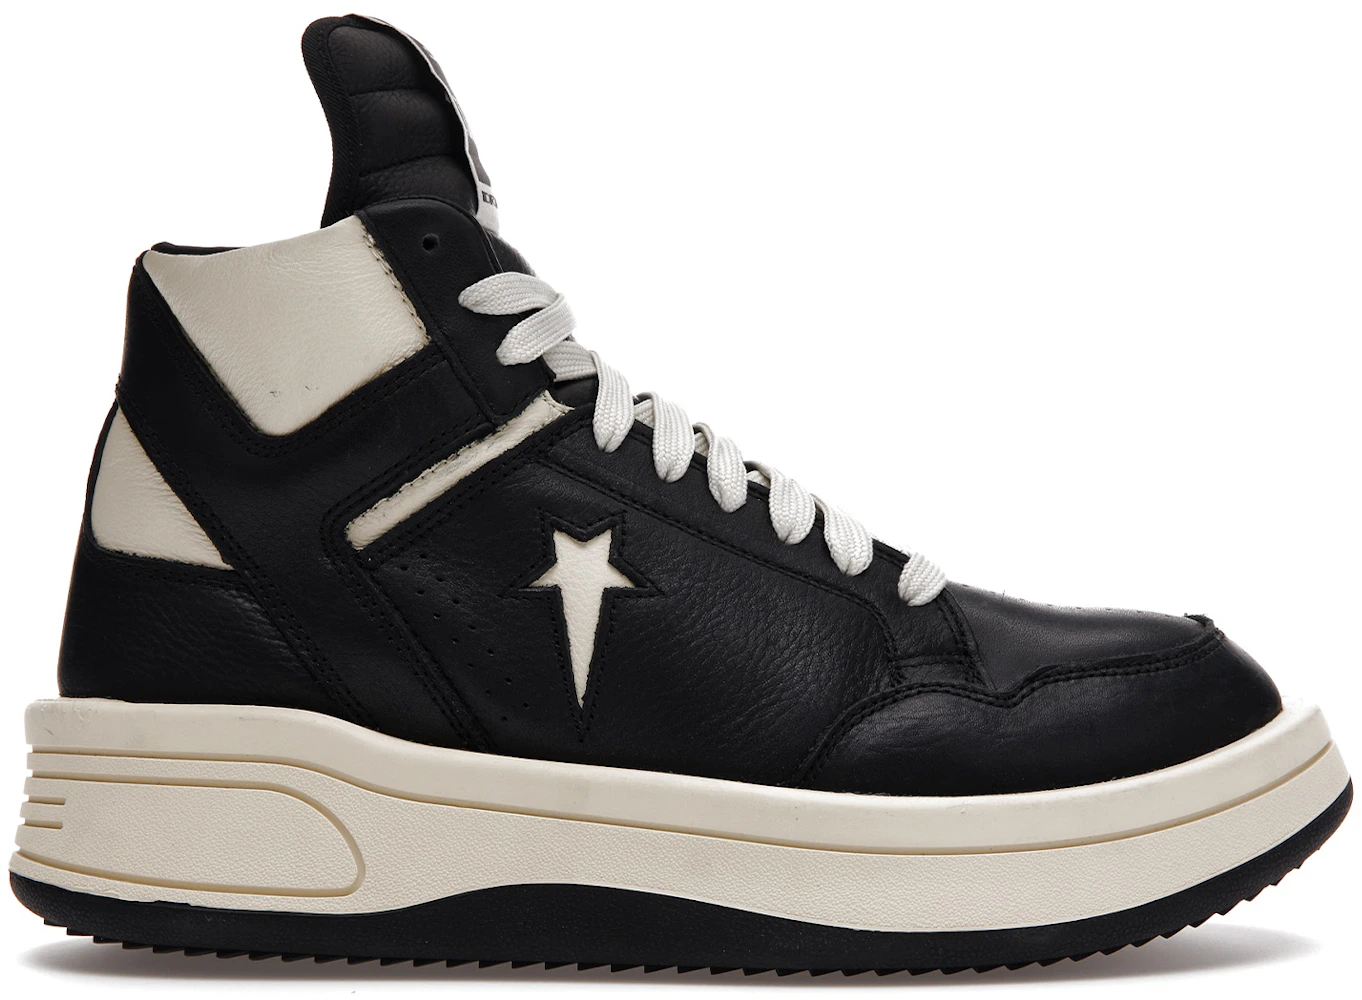 A Brief History of Rick Owens Sneaker Collaborations